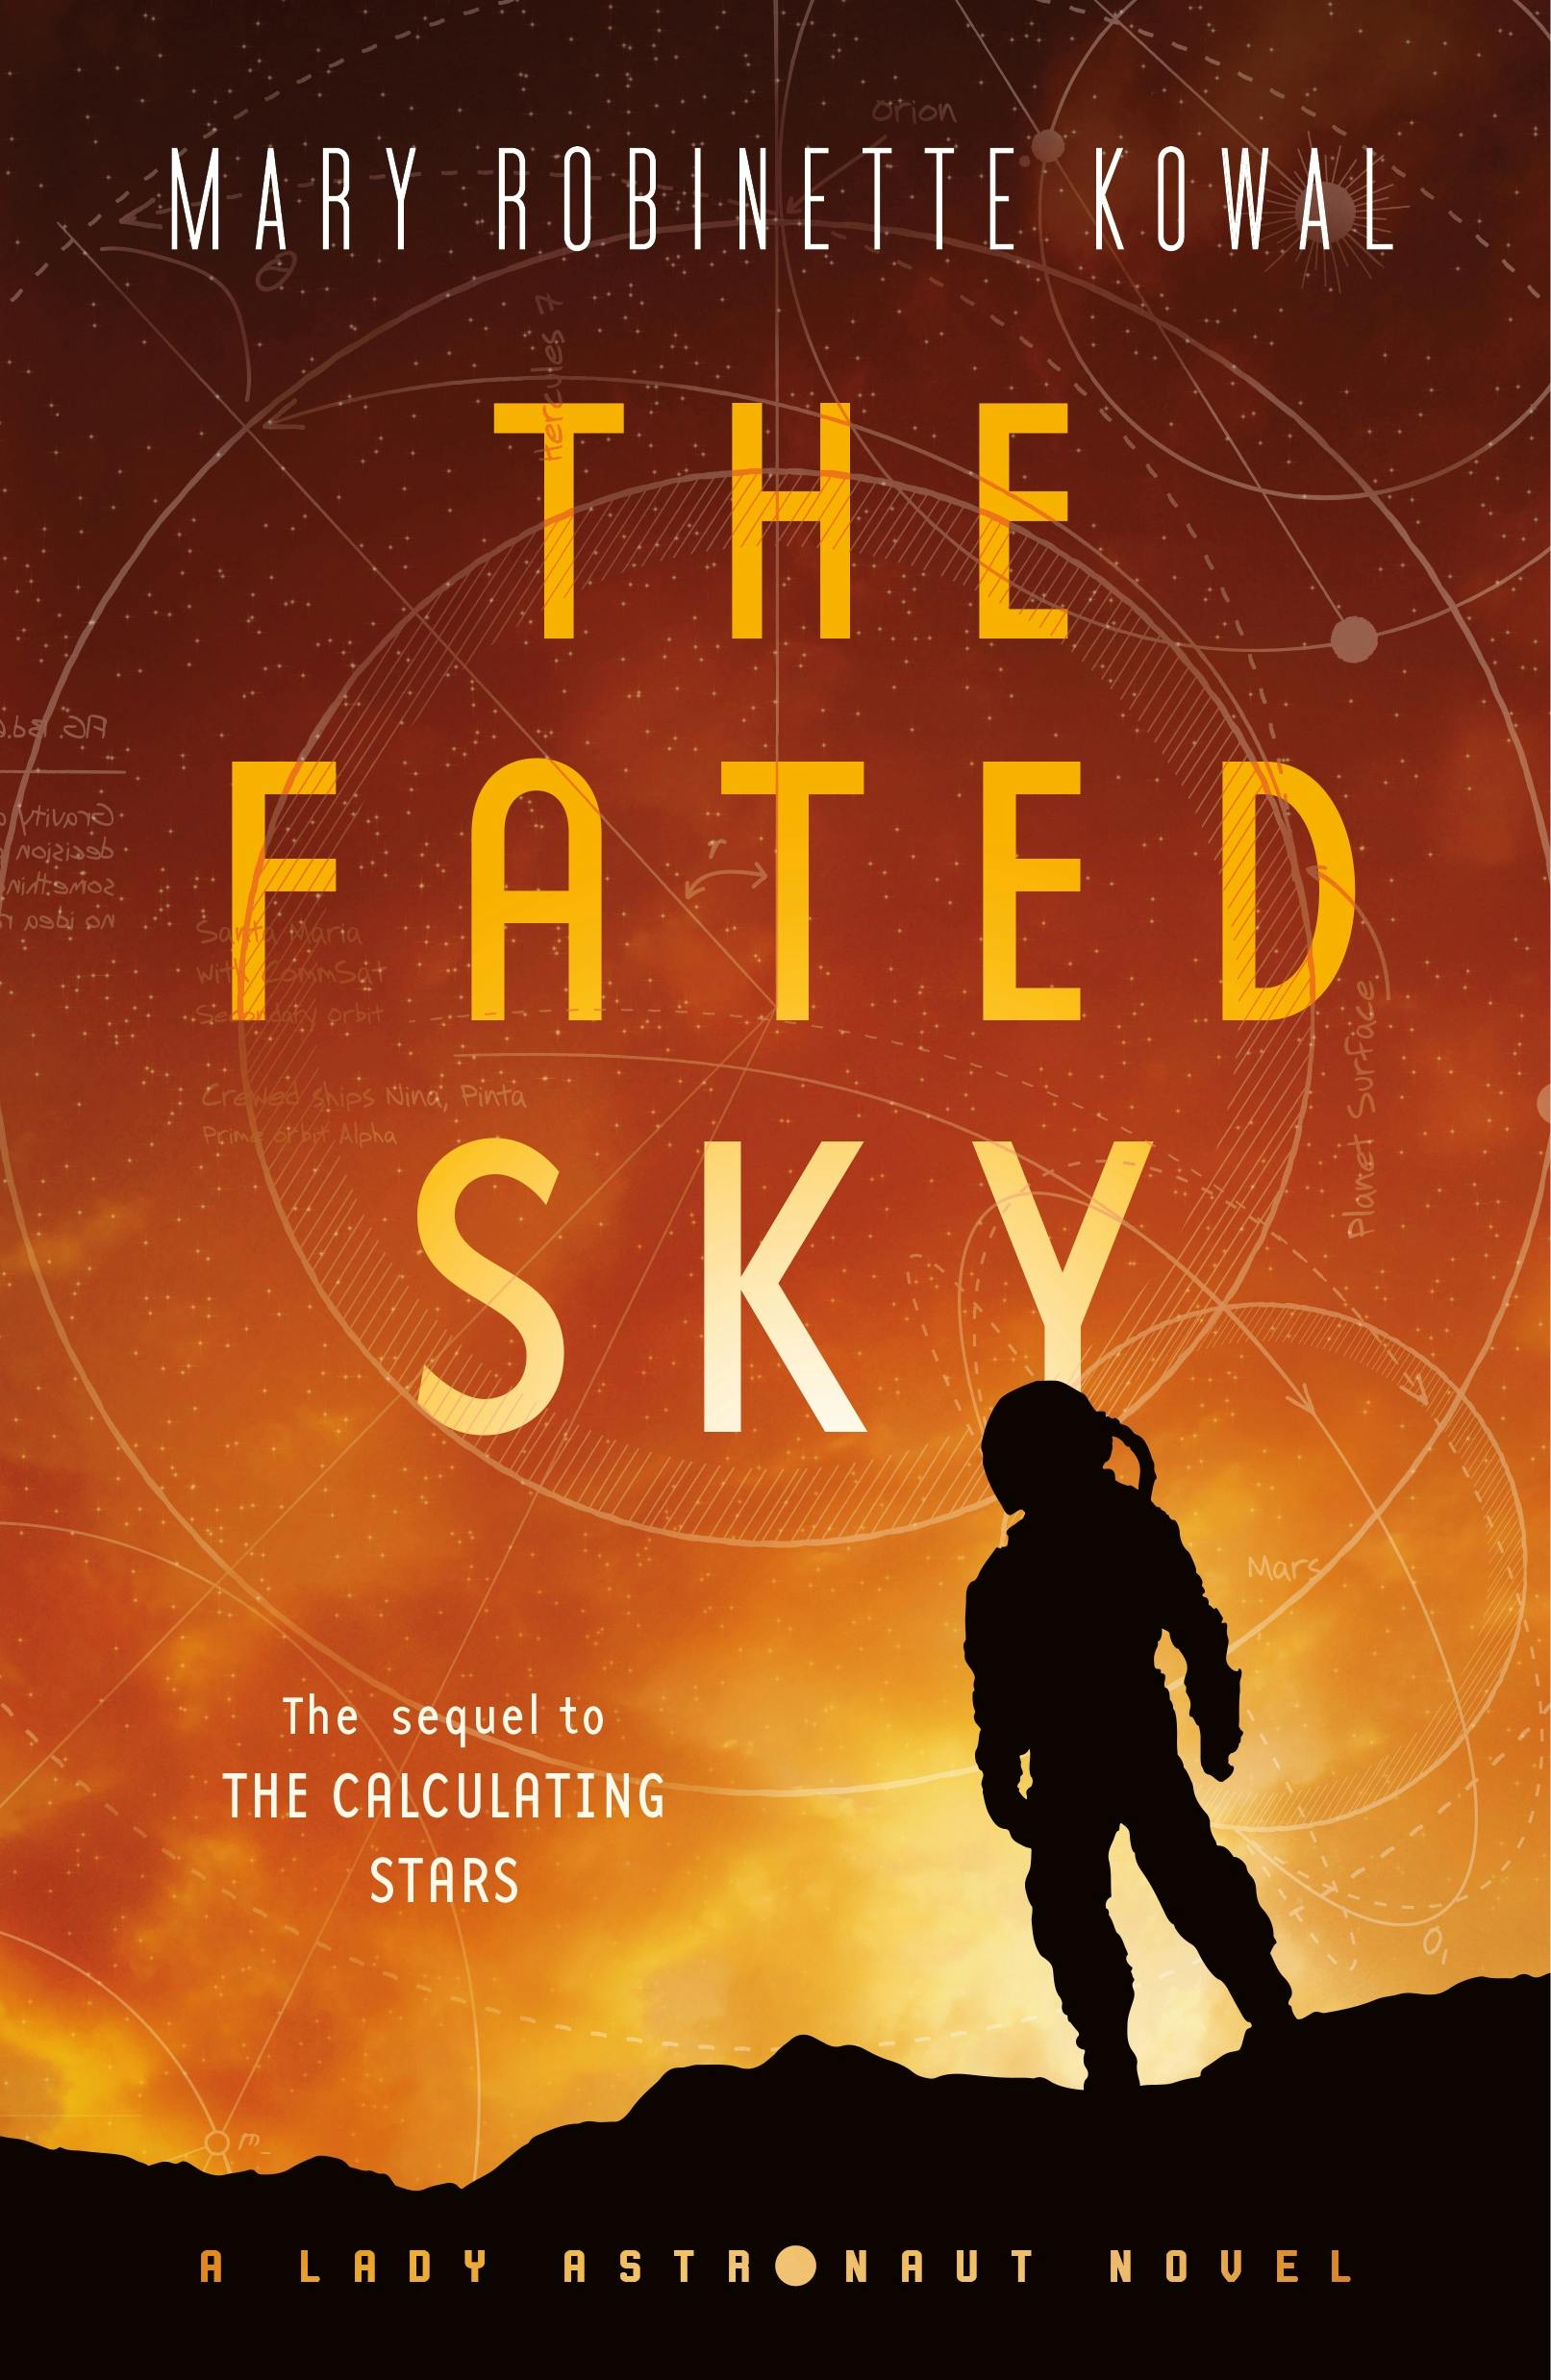 Cover for the book titled as: The Fated Sky